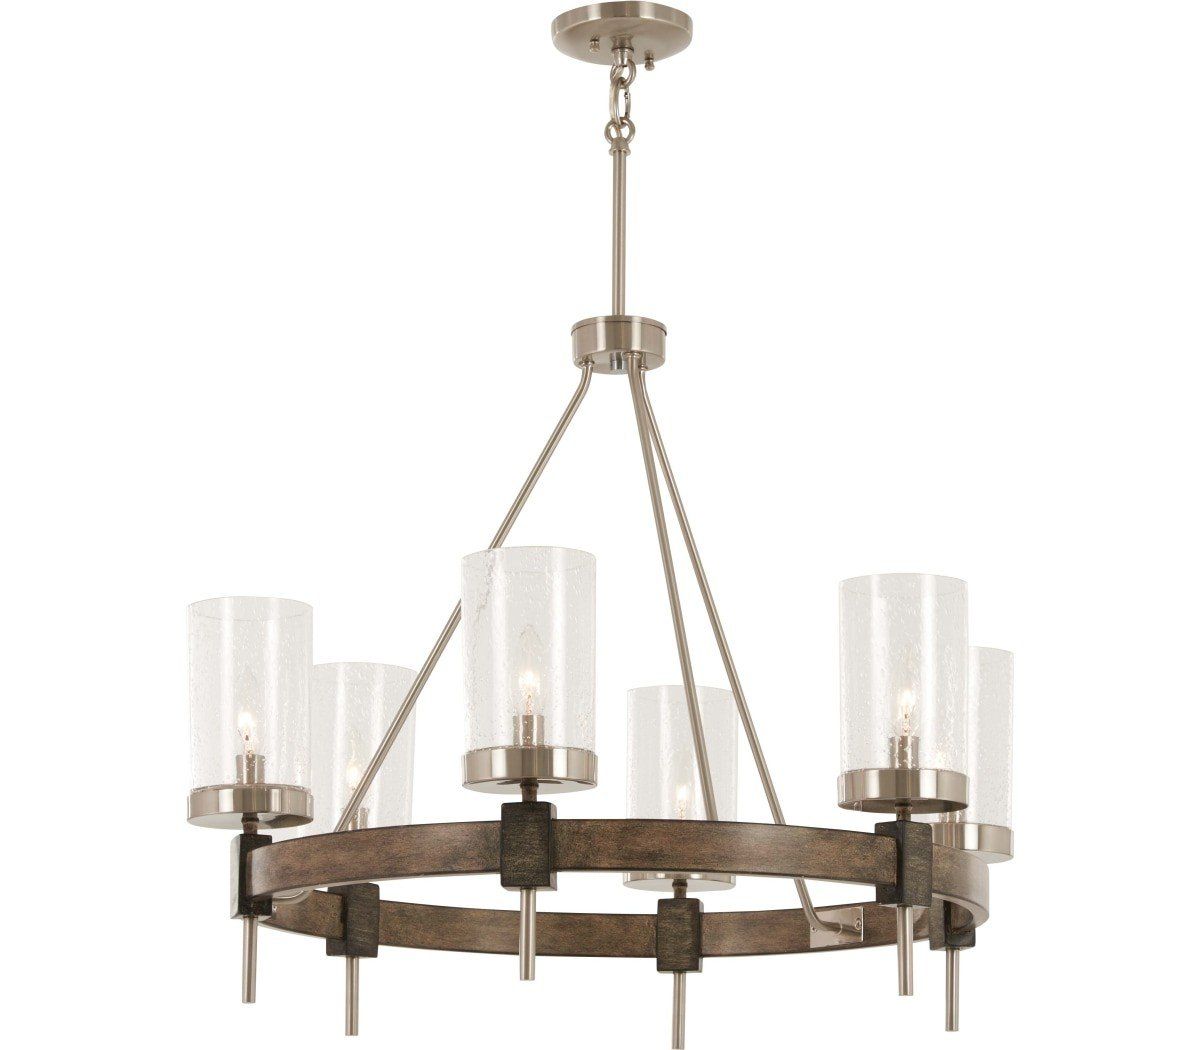 Minka Lavery 4638 106 Bridlewood 8 Light Stone Grey With Regard To Stone Grey With Brushed Nickel Six Light Chandeliers (View 4 of 15)